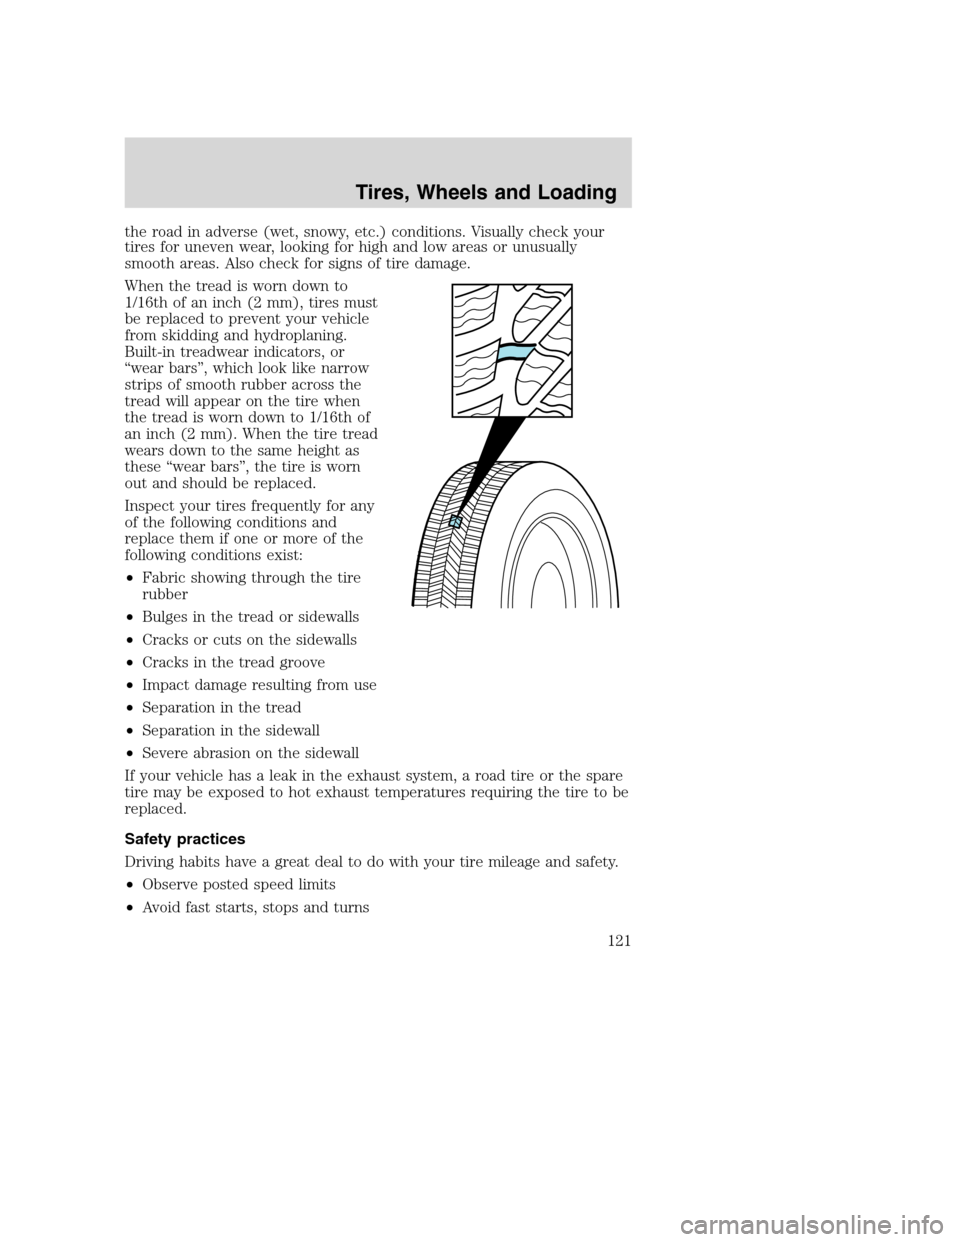 MAZDA MODEL B-SERIES 2005  Owners Manual (in English) the road in adverse (wet, snowy, etc.) conditions. Visually check your
tires for uneven wear, looking for high and low areas or unusually
smooth areas. Also check for signs of tire damage.
When the tr